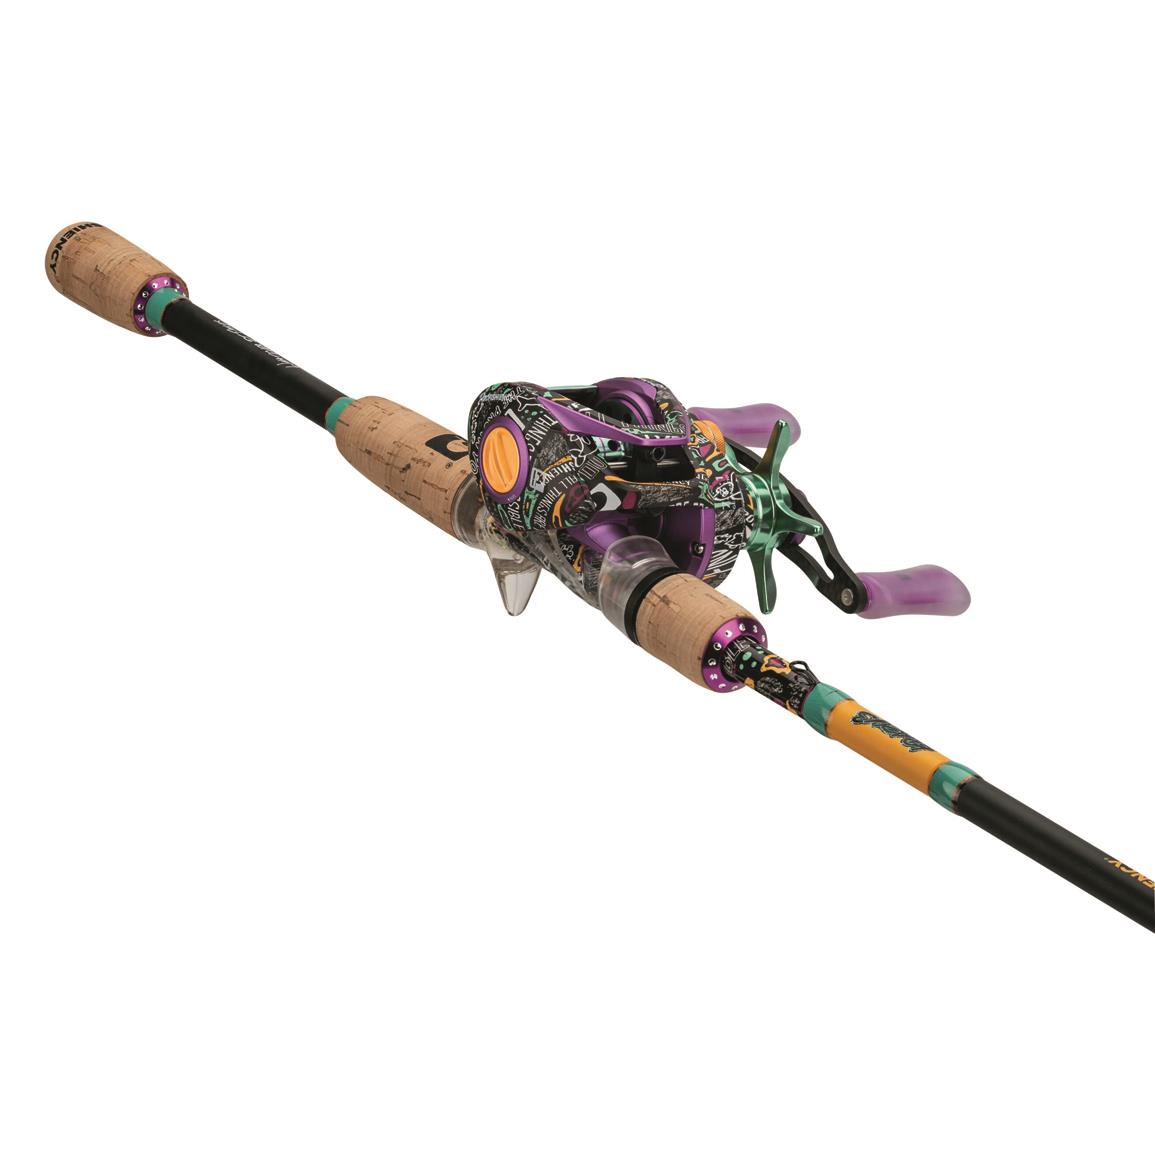 ProFISHiency Tiny but Mighty Spinning Pocket Combo, 5.2:1 Gear Ratio -  734008, Travel Combos at Sportsman's Guide